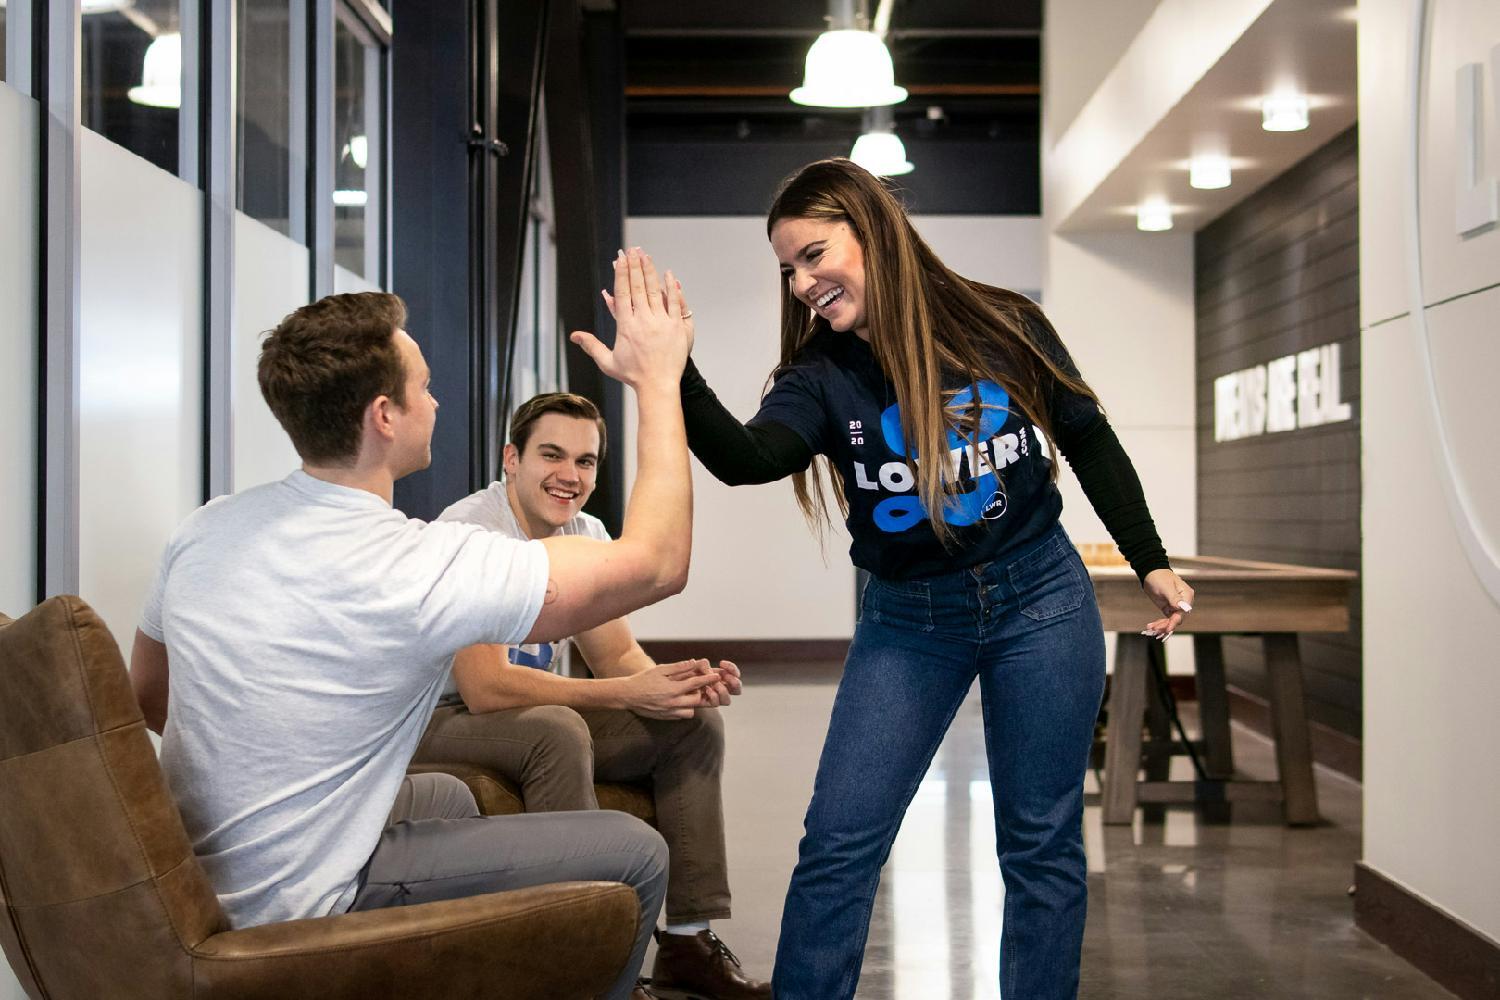 Two employees support each other with a high five.